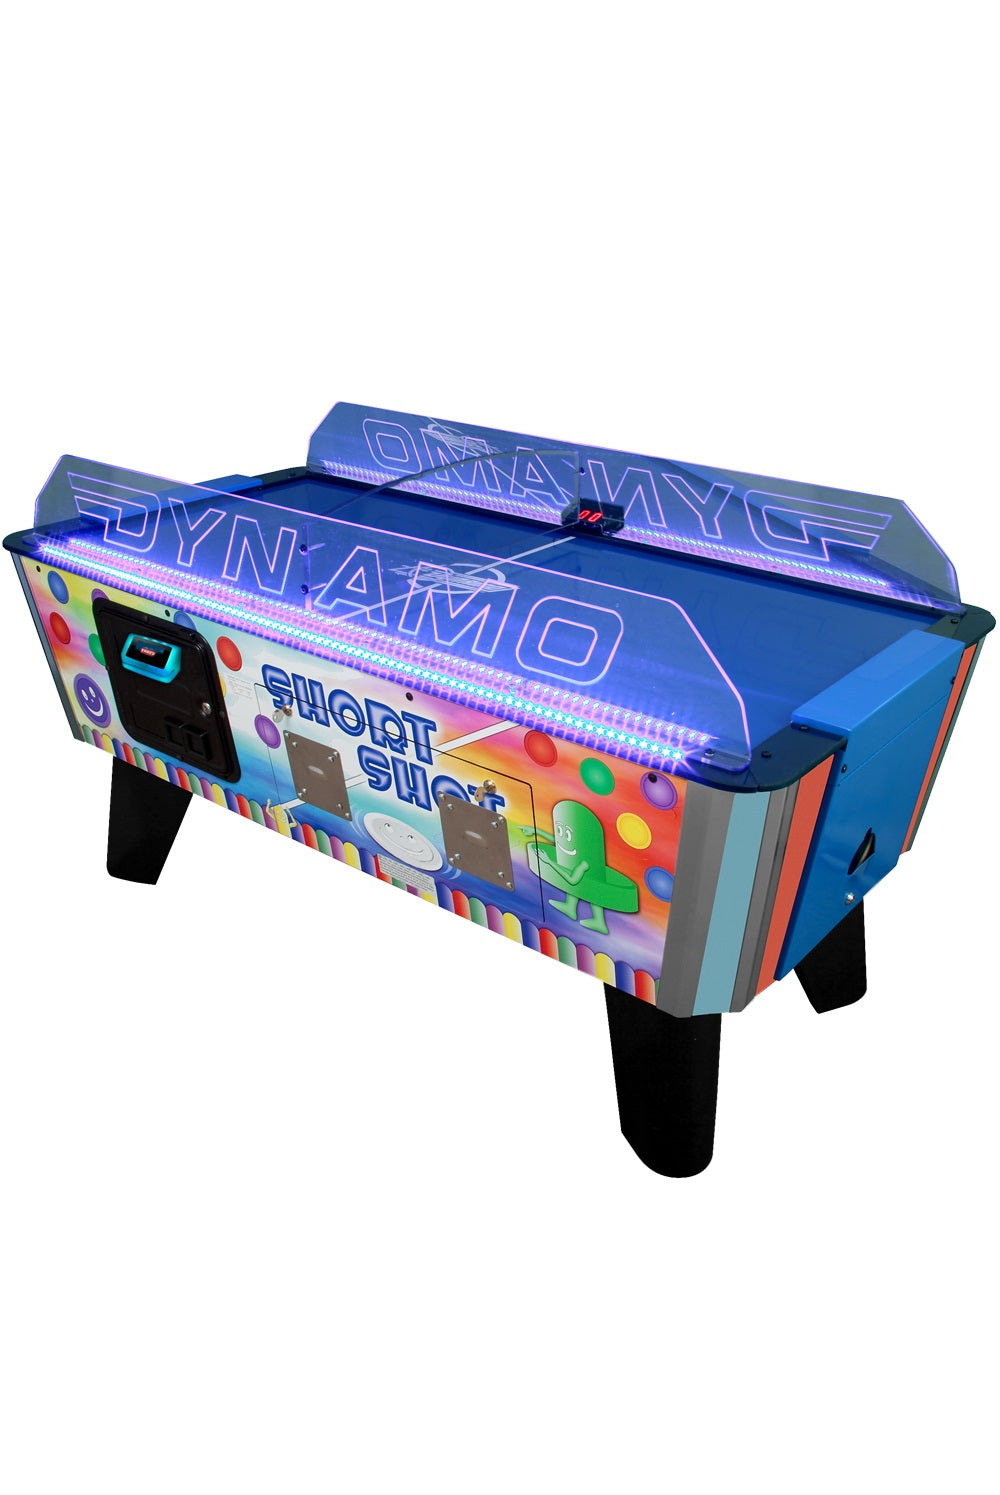 Picture of Dynamo 5' Short Shot Air Hockey Table (Coin)